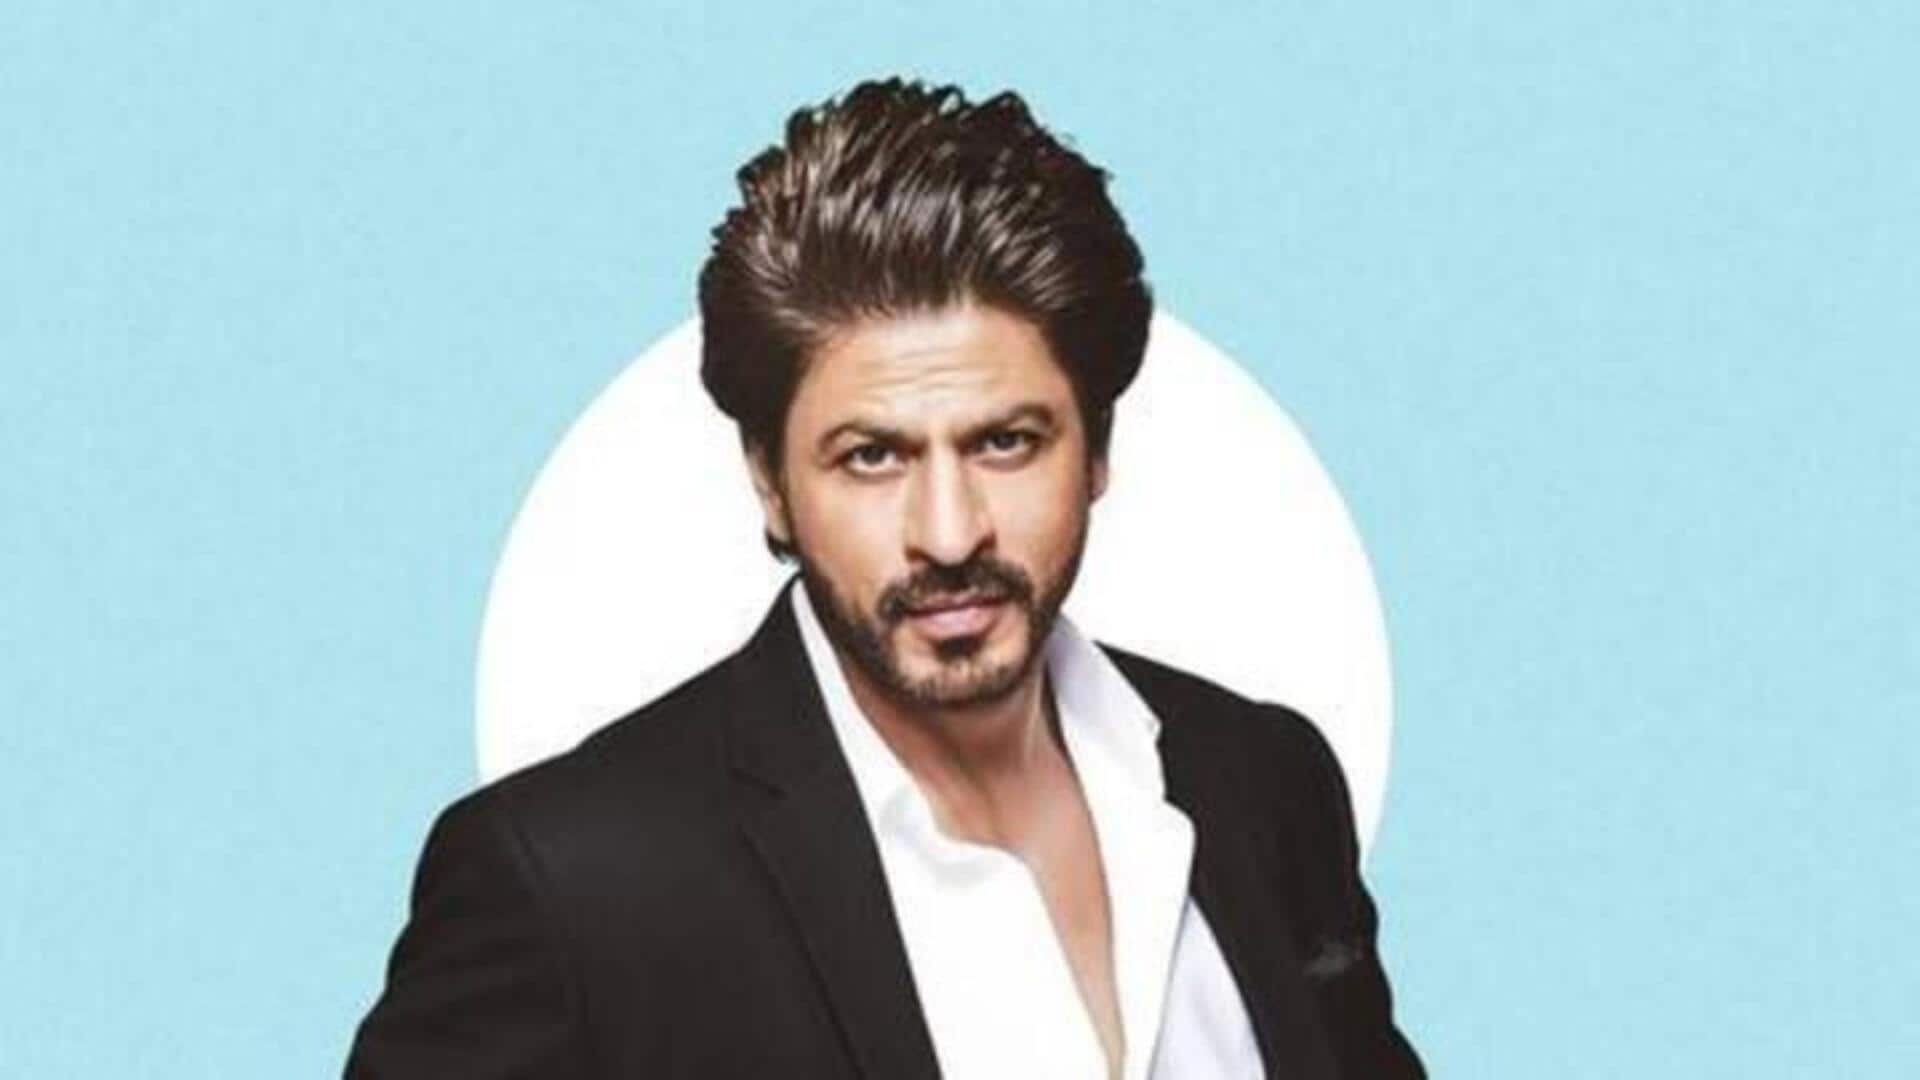 SRK will play a don, but not in 'Don 3'